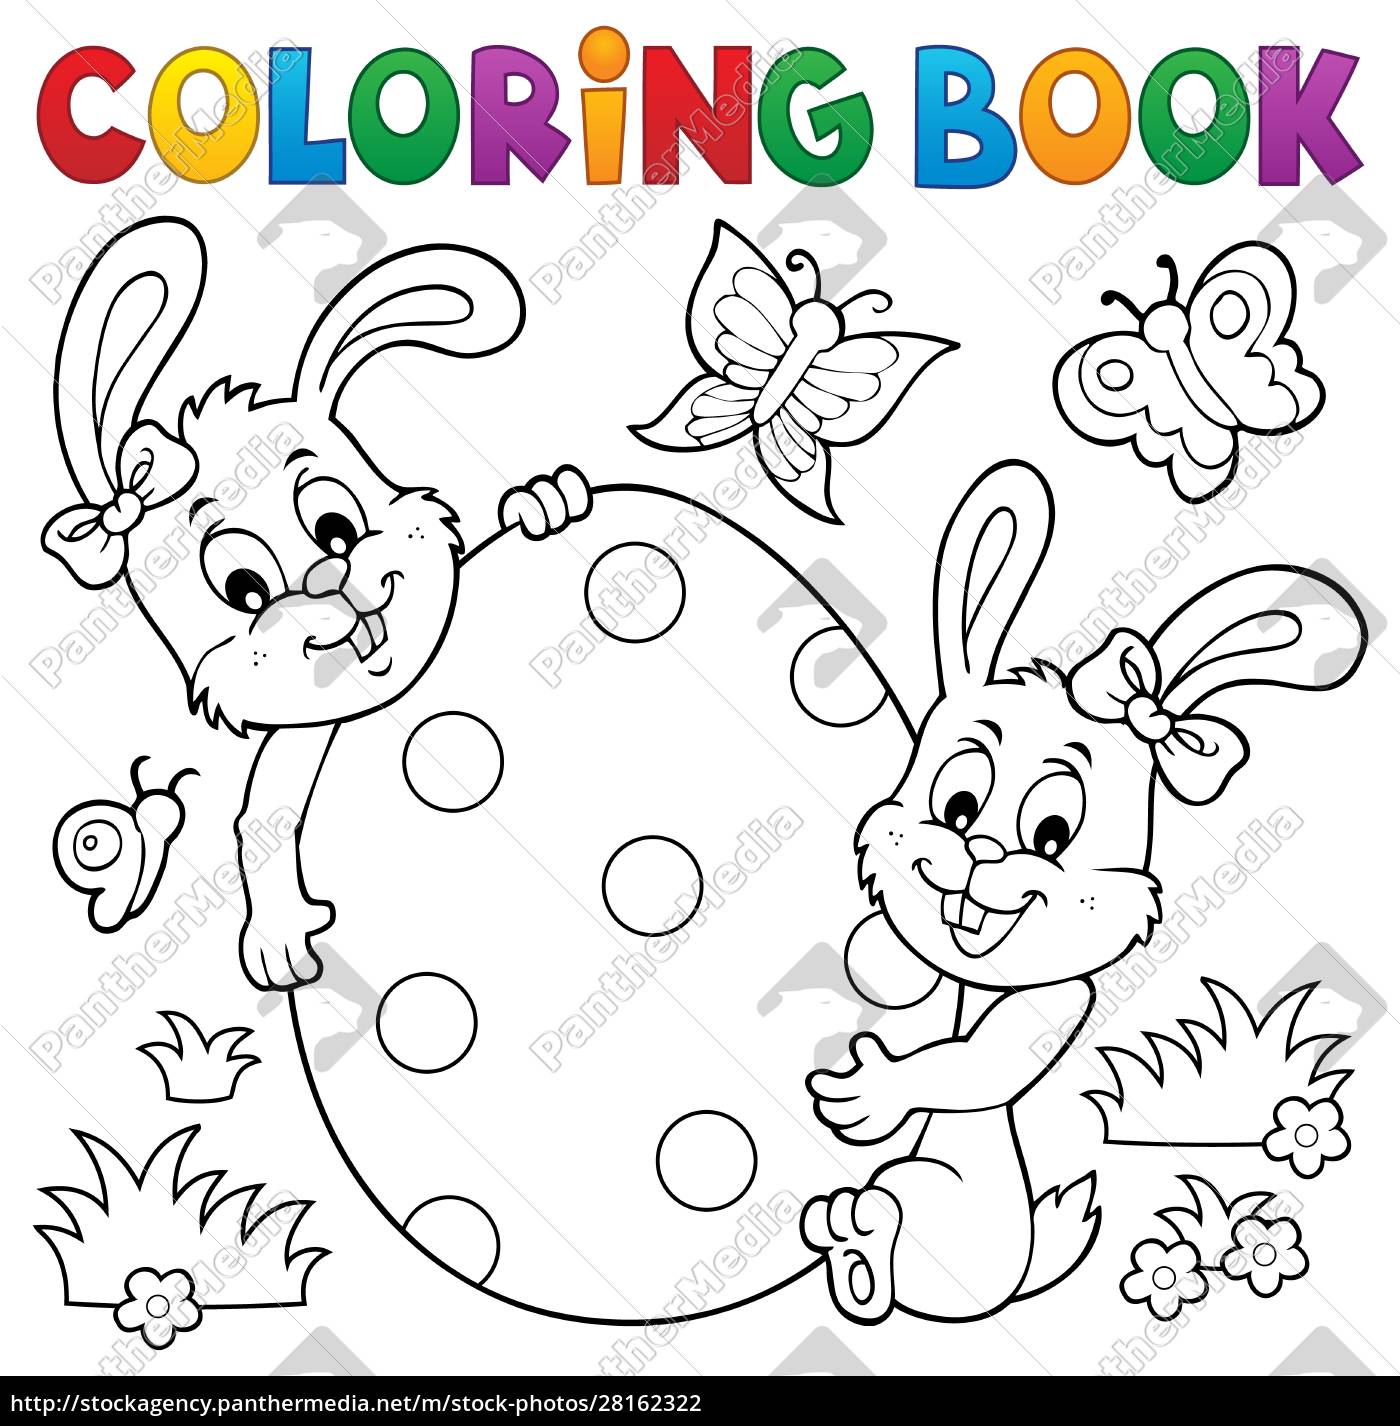 Download Coloring Book Easter Egg And Rabbits Stock Image 28162322 Panthermedia Stock Agency